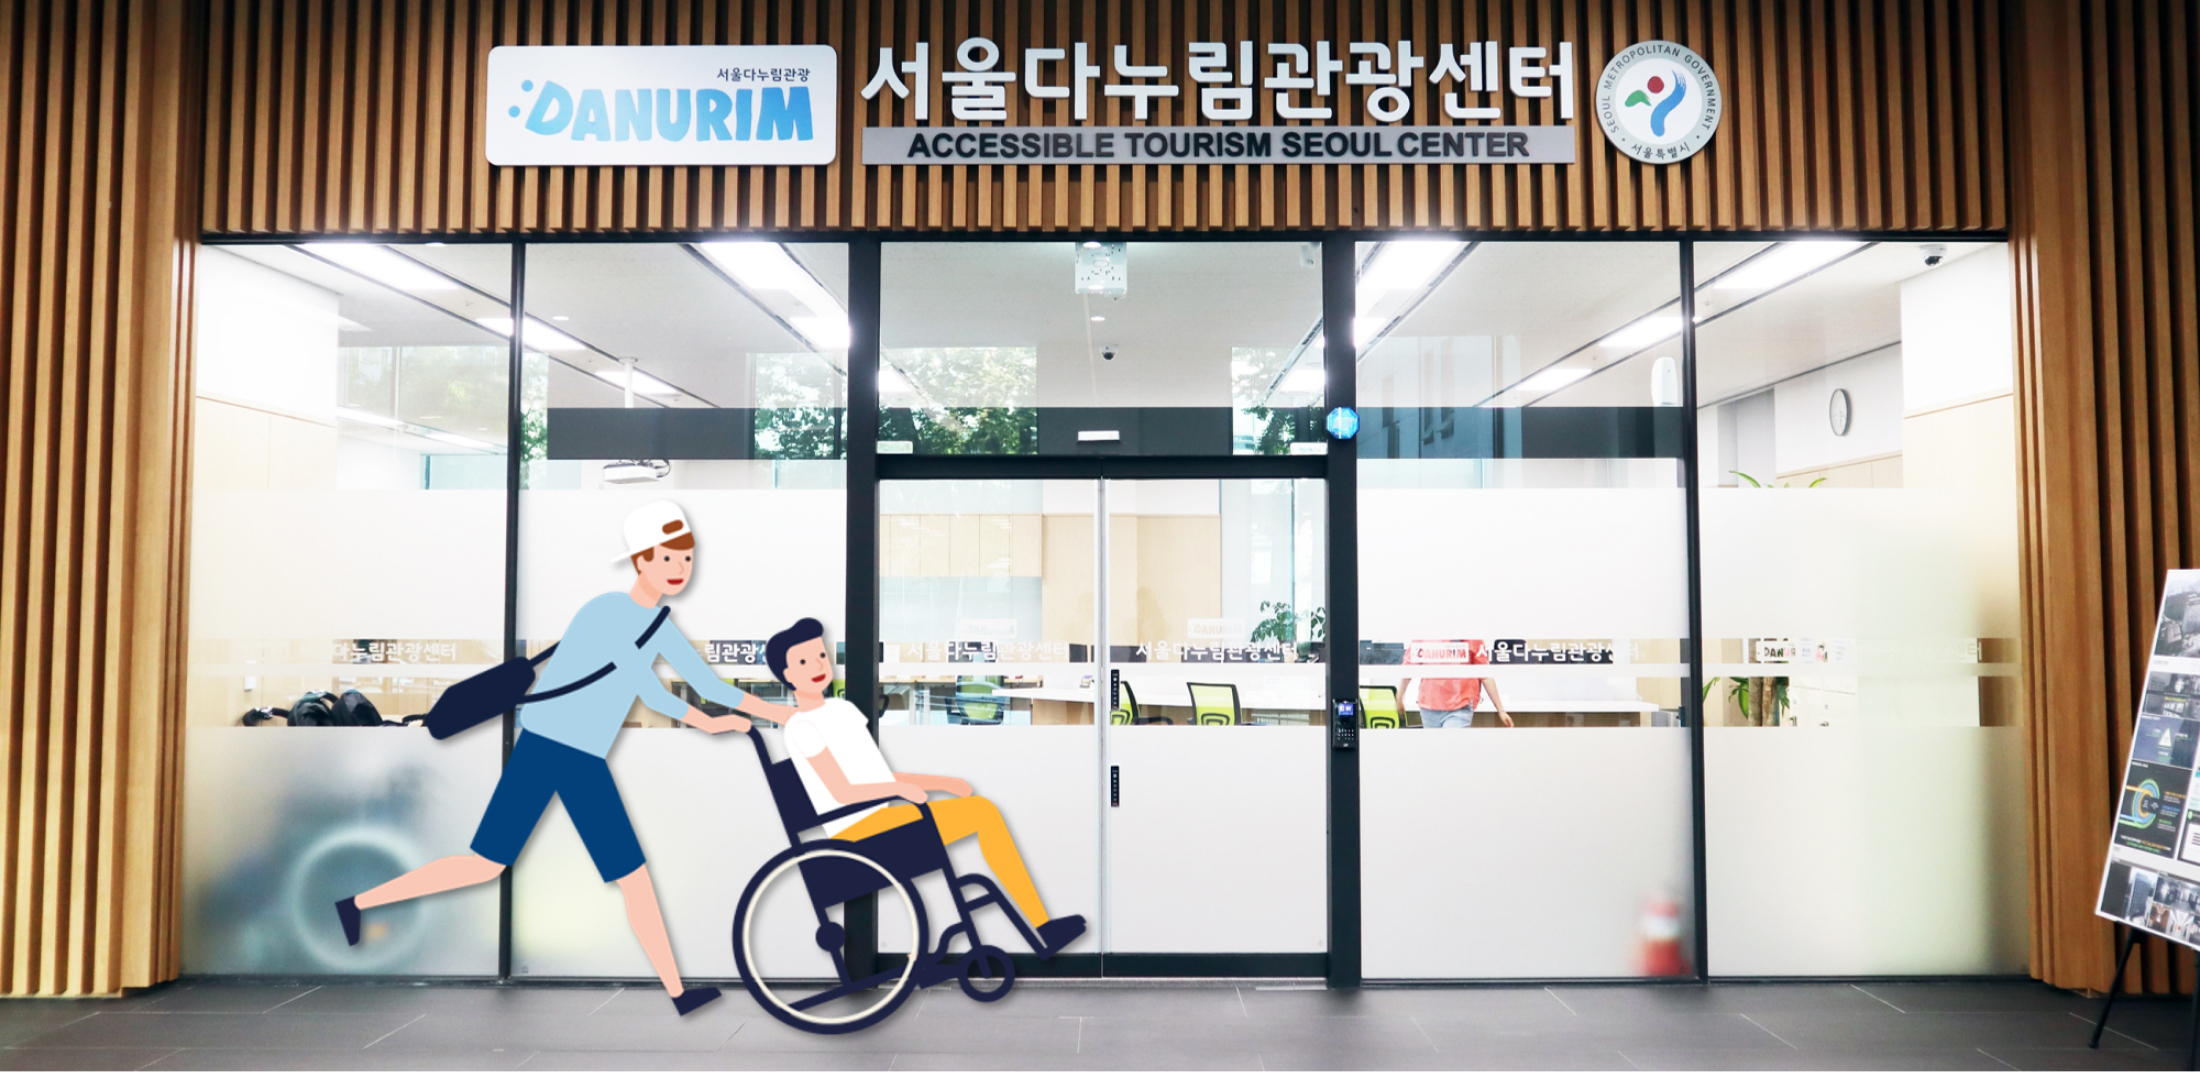 Illustration of a person in a wheelchair and a person pushing a wheelchair passing through the Danurim Center